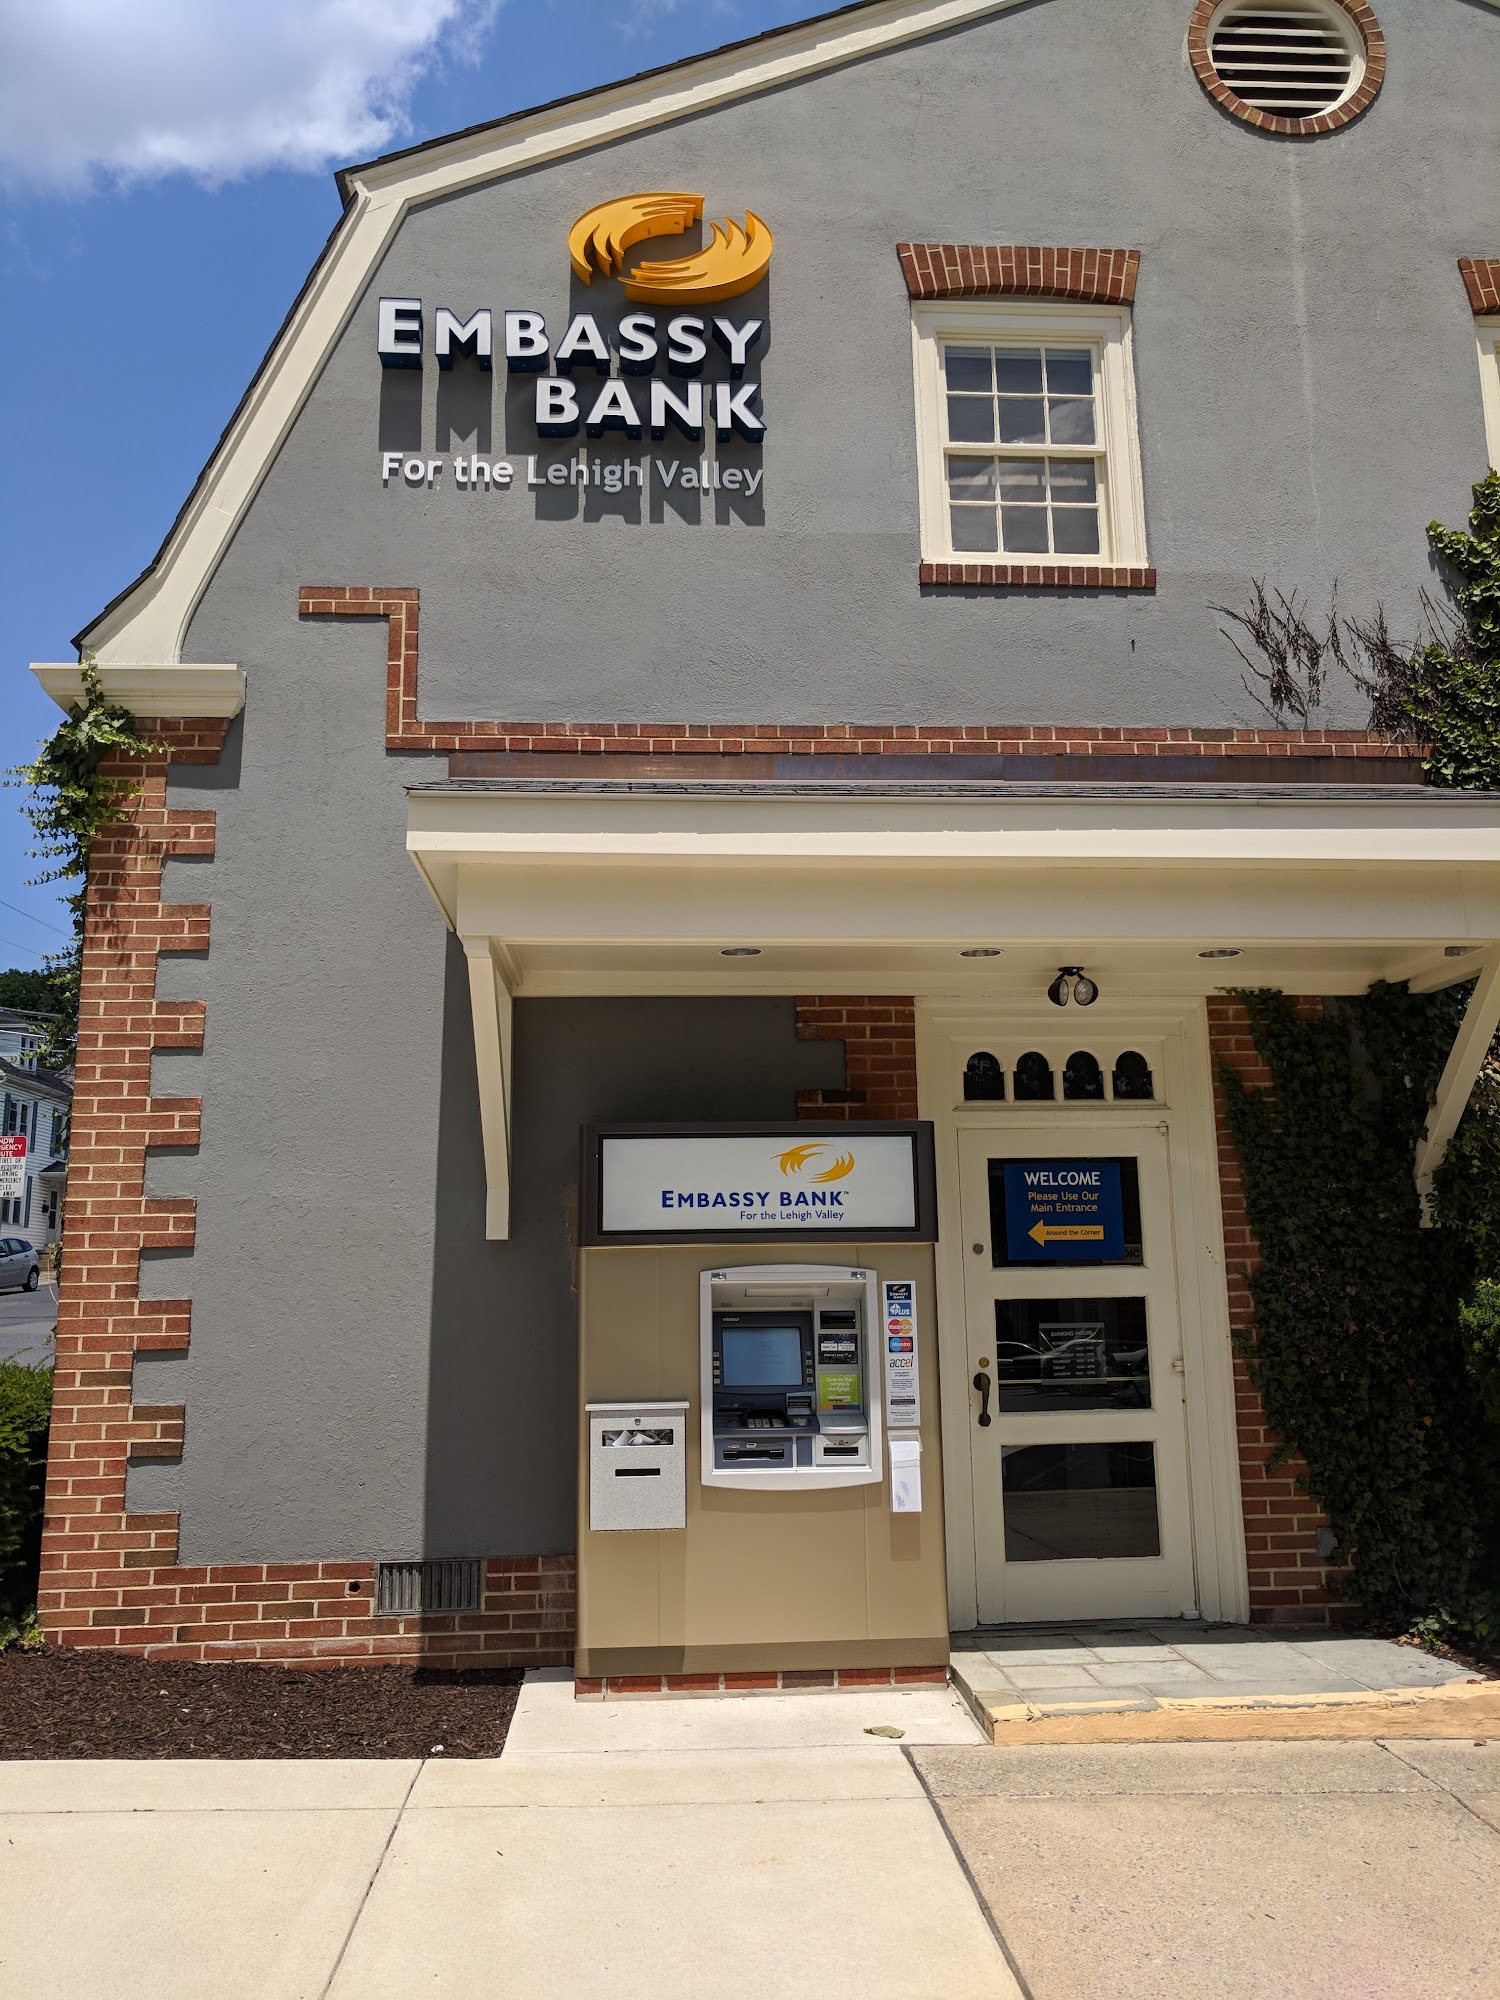 Embassy Bank for the Lehigh Valley - Nazareth